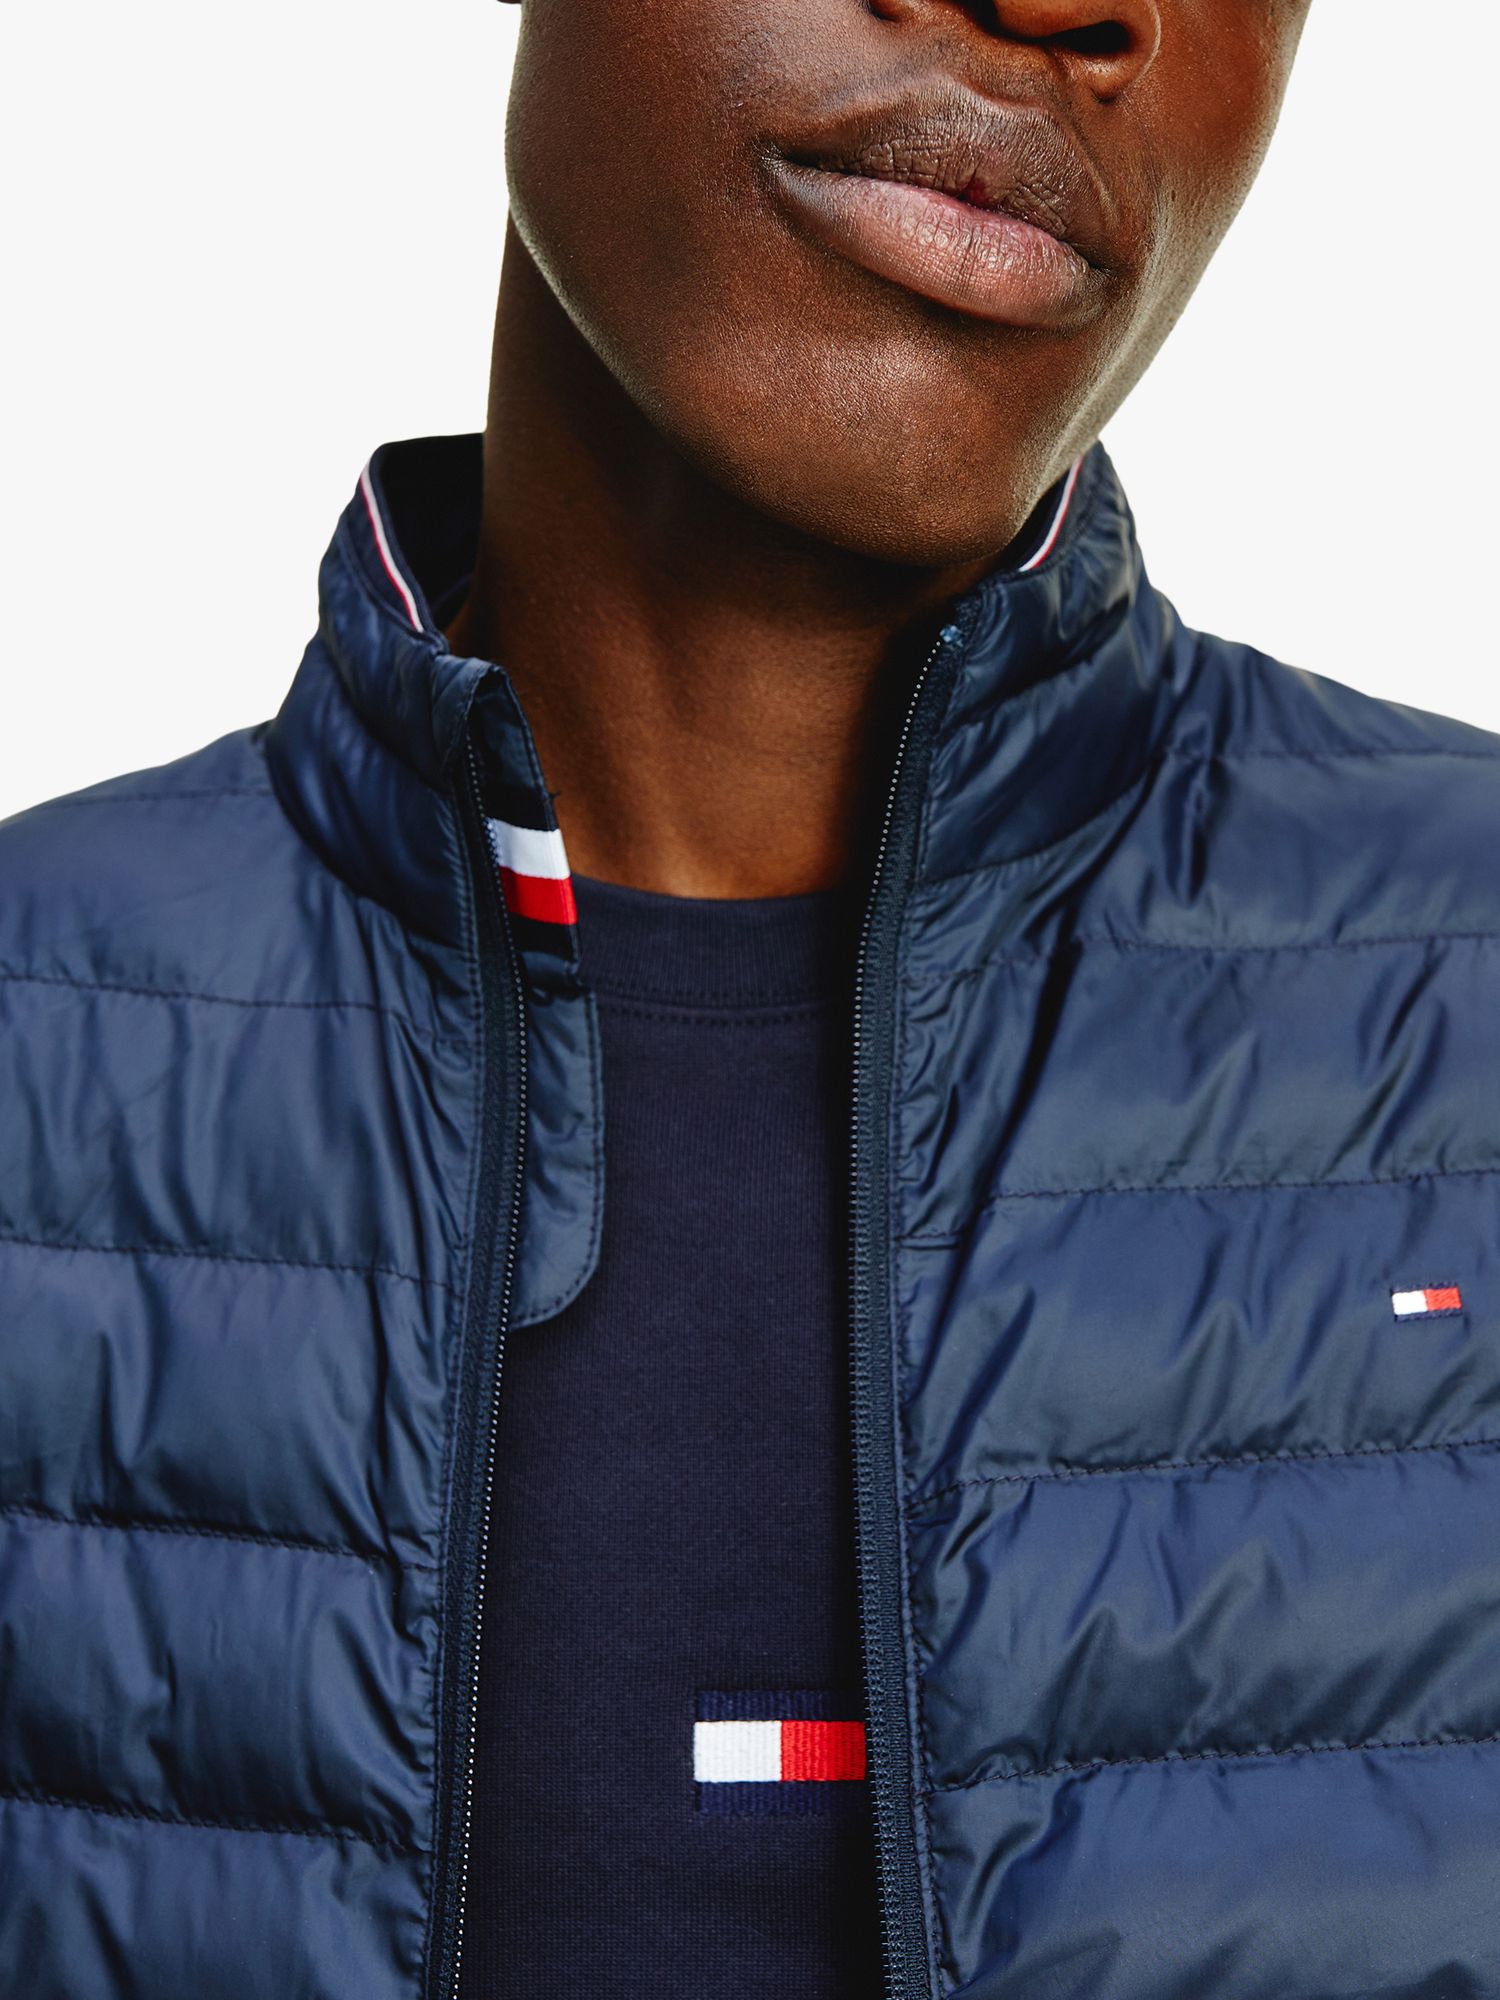 Tommy Hilfiger Packable Down Desert Lewis Partners Sky & John at Jacket, Quilted